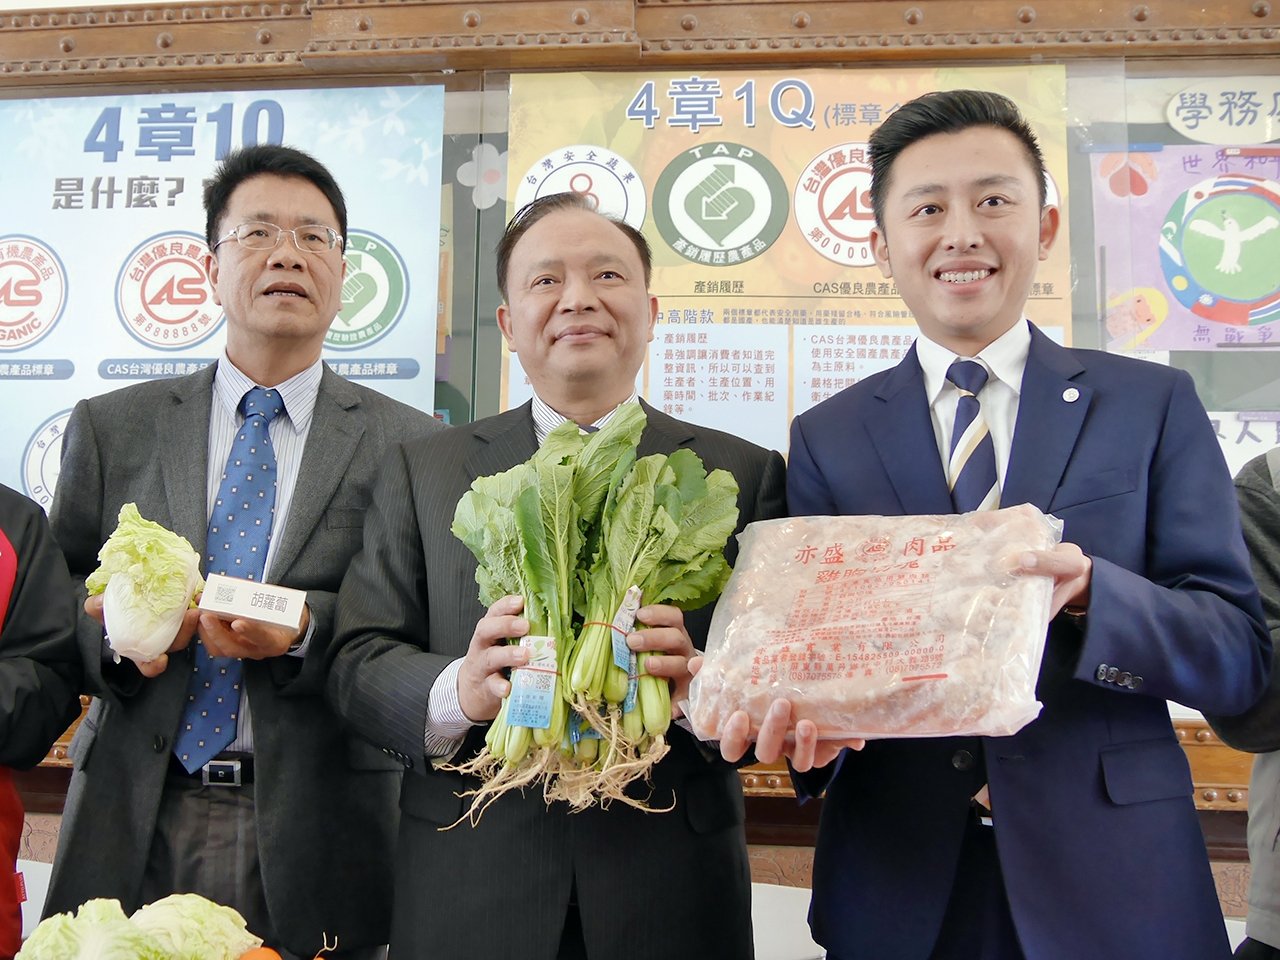 Minister Lin paid a field visit to San Min Primary School in Hsinchu City and learned about the status of the preparatory works for the trial run.